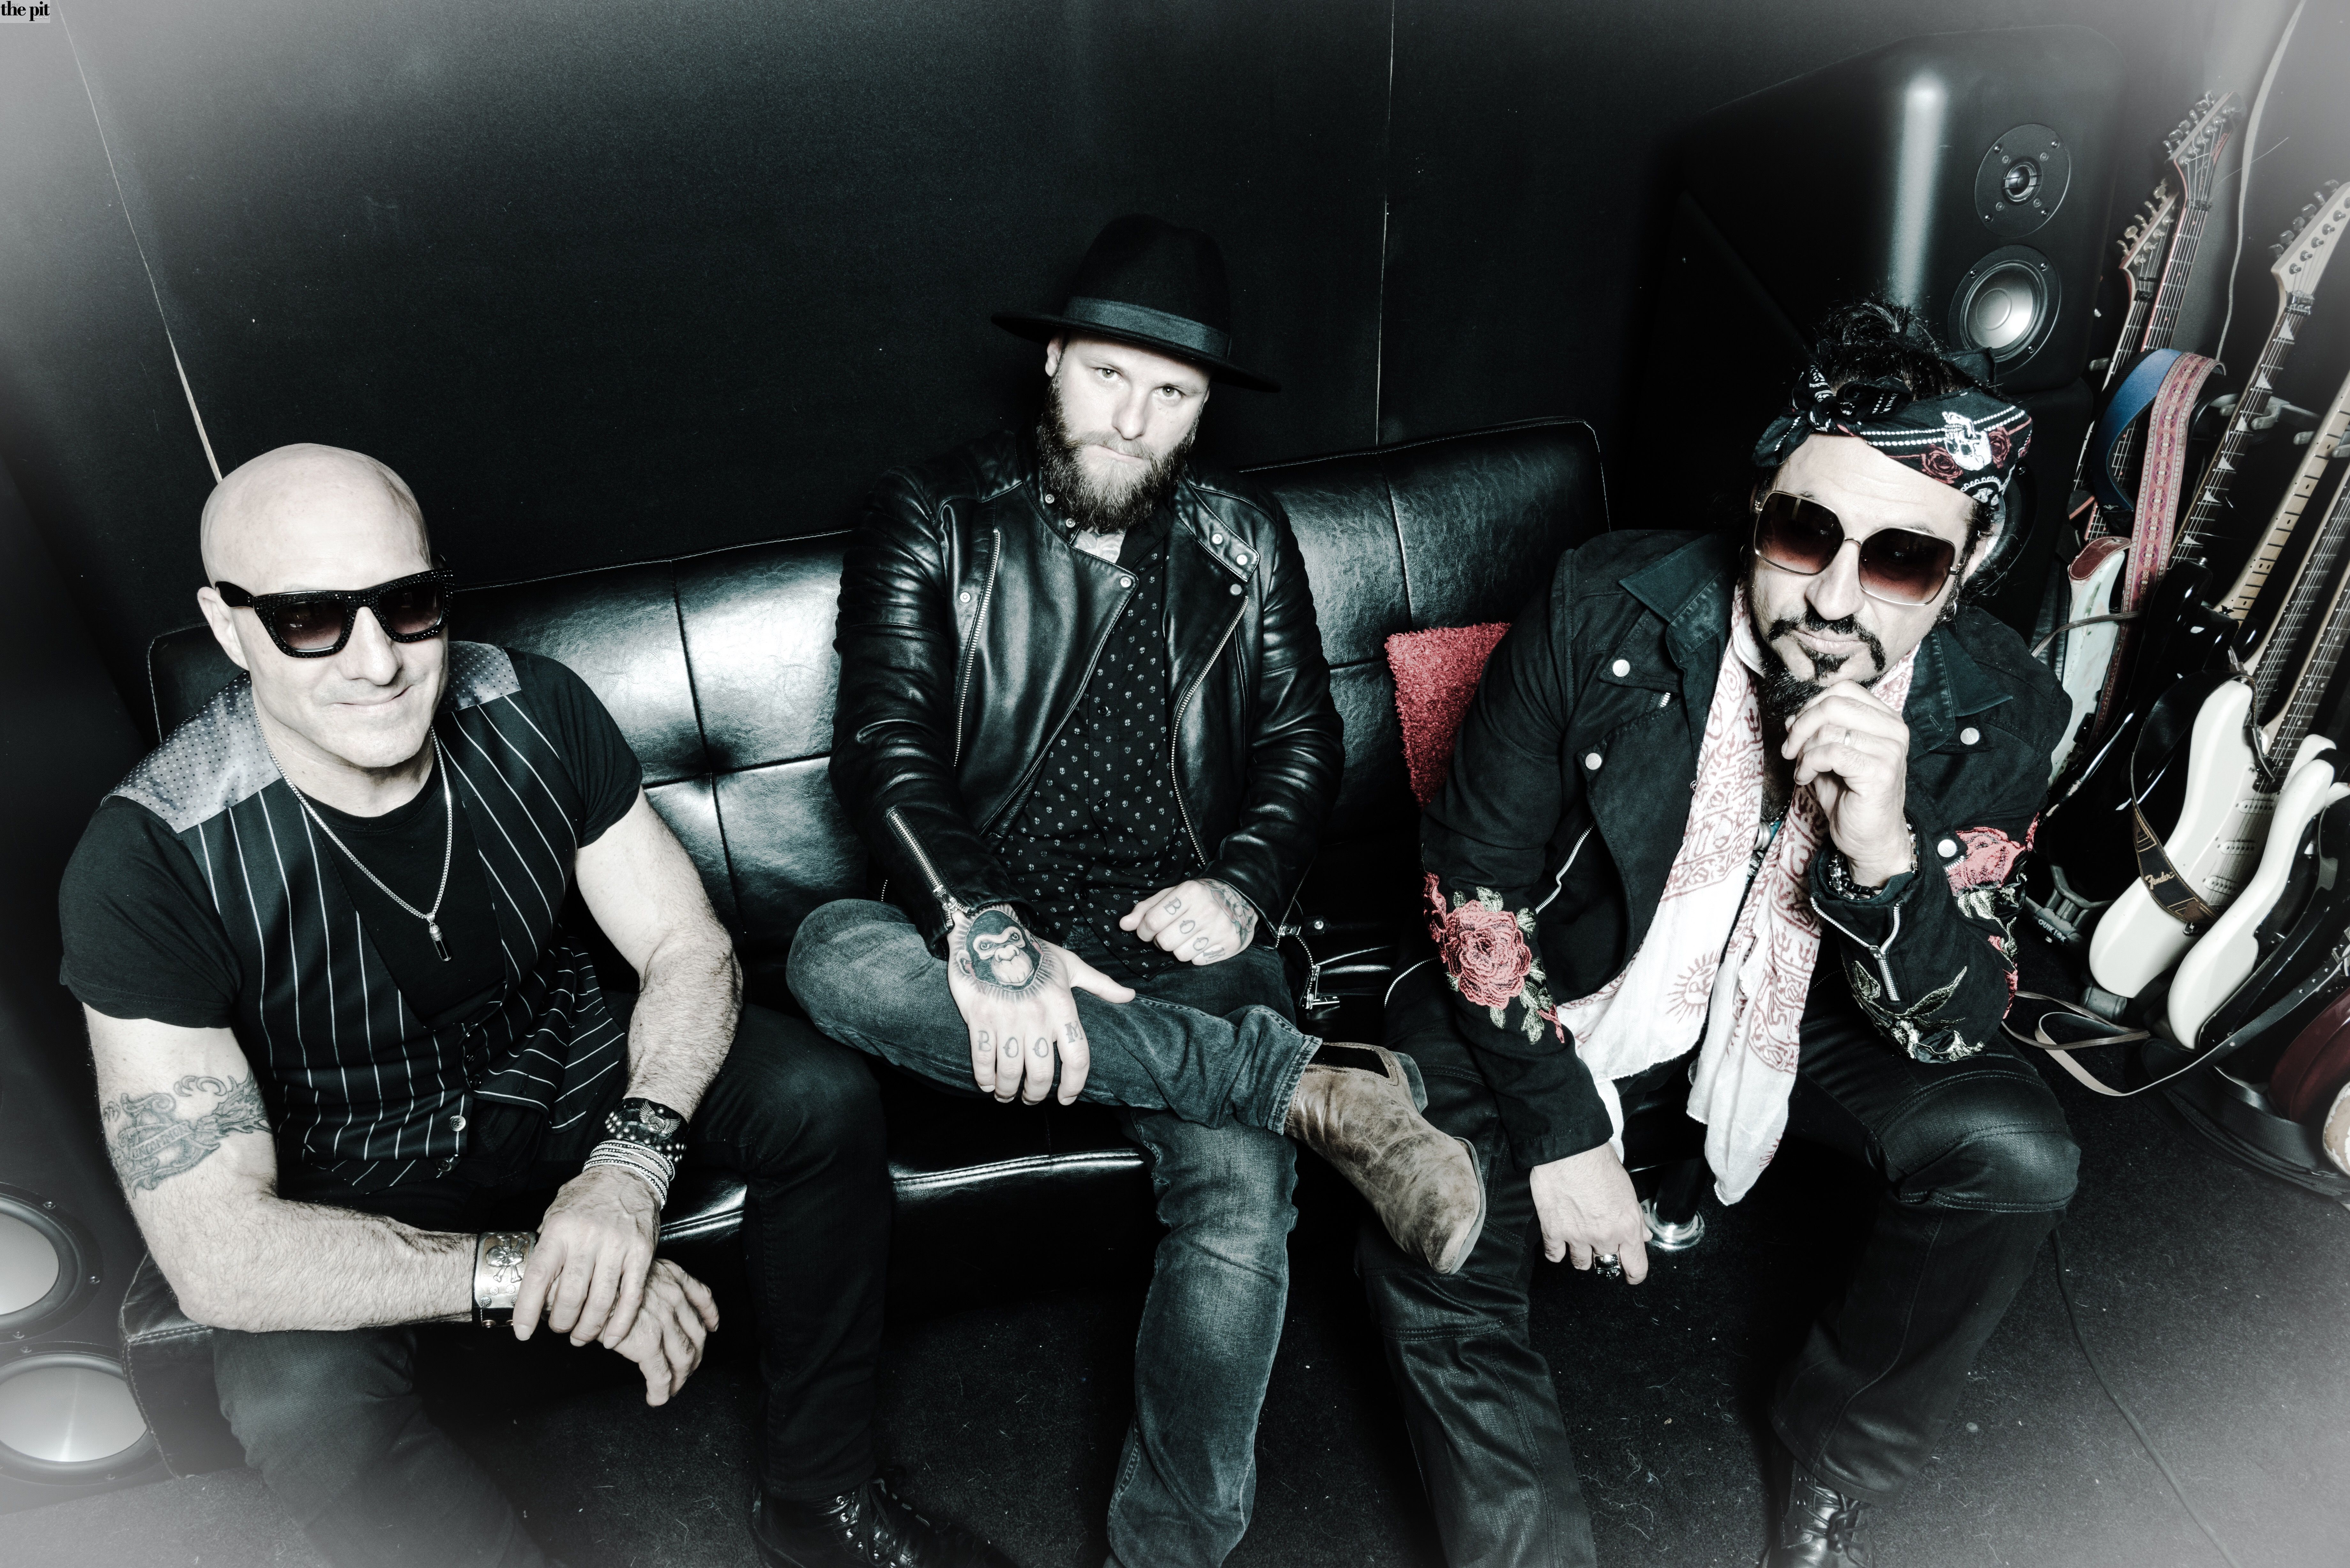 Three male musicians from Supersonic Blues Machine sitting on a black leather sofa in a recording studio, wearing edgy rock-style clothes and accessories.